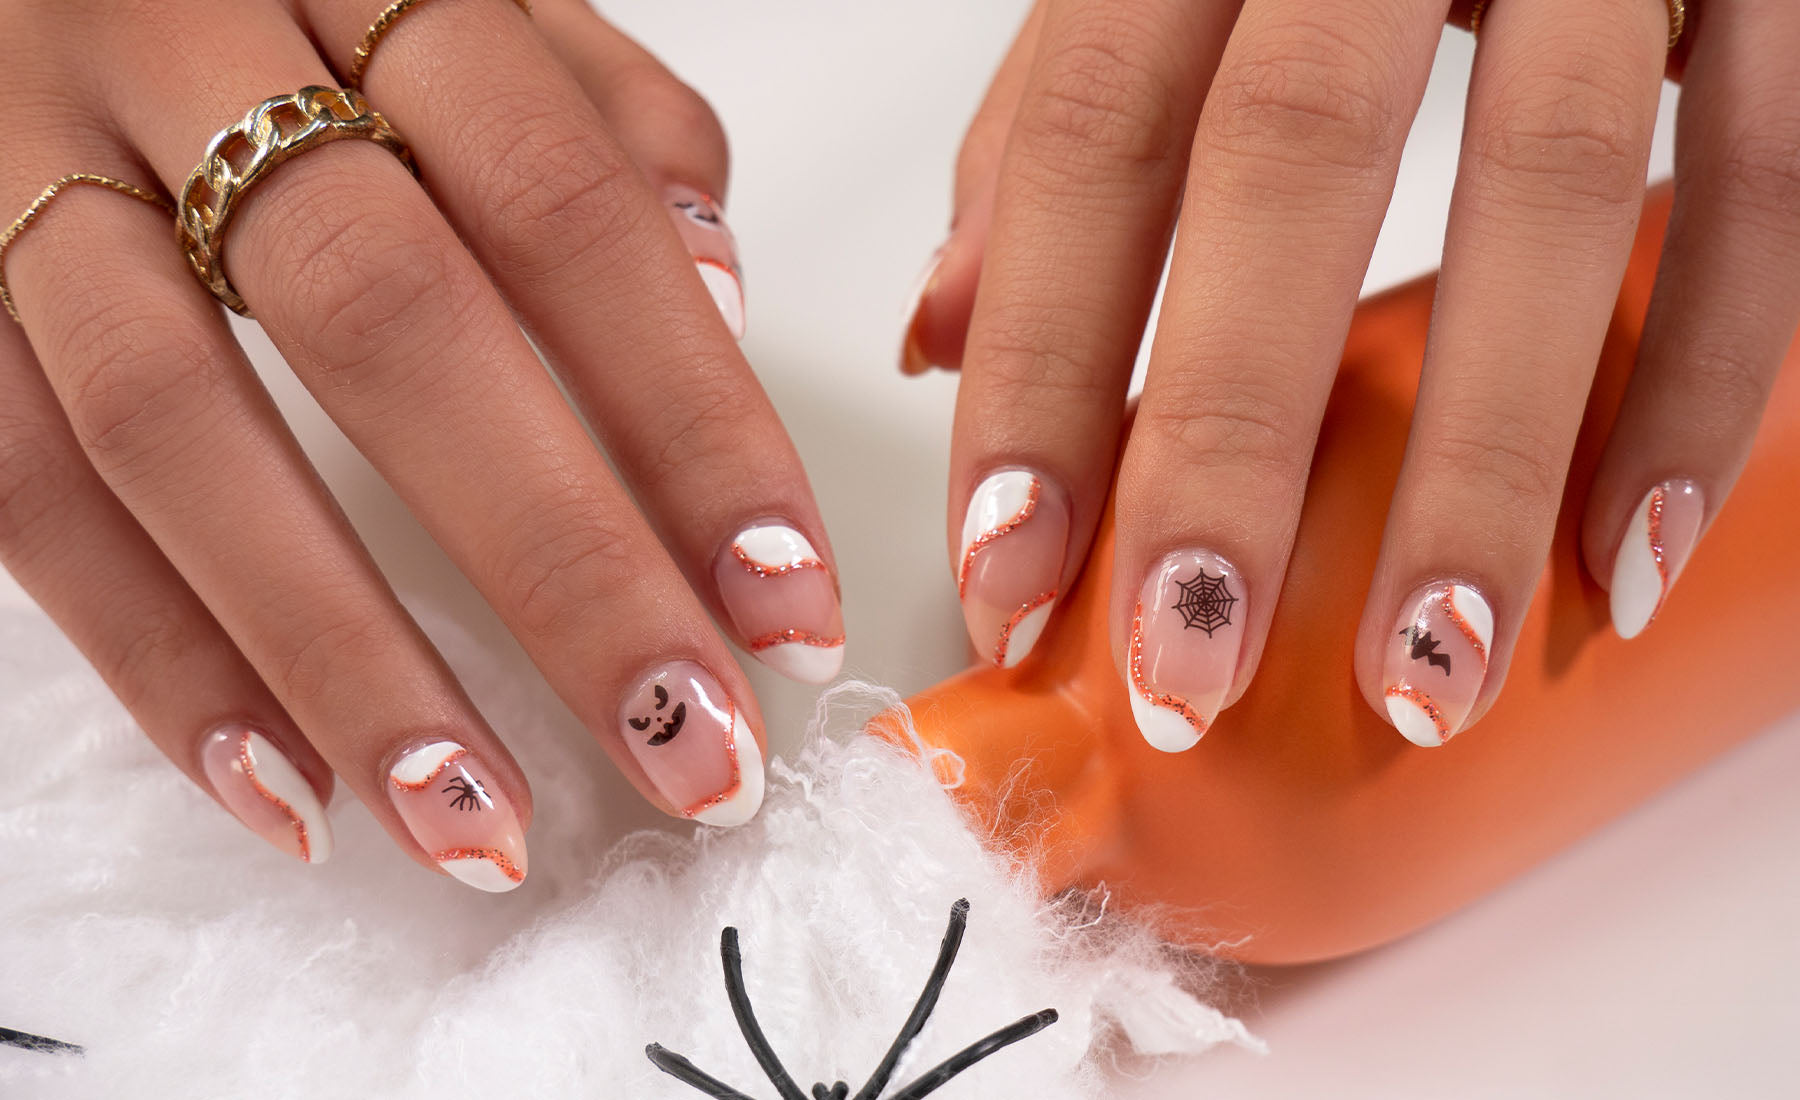 Gelous Halloween Swirls and Stickers gel nail art - photographed in New Zealand on model